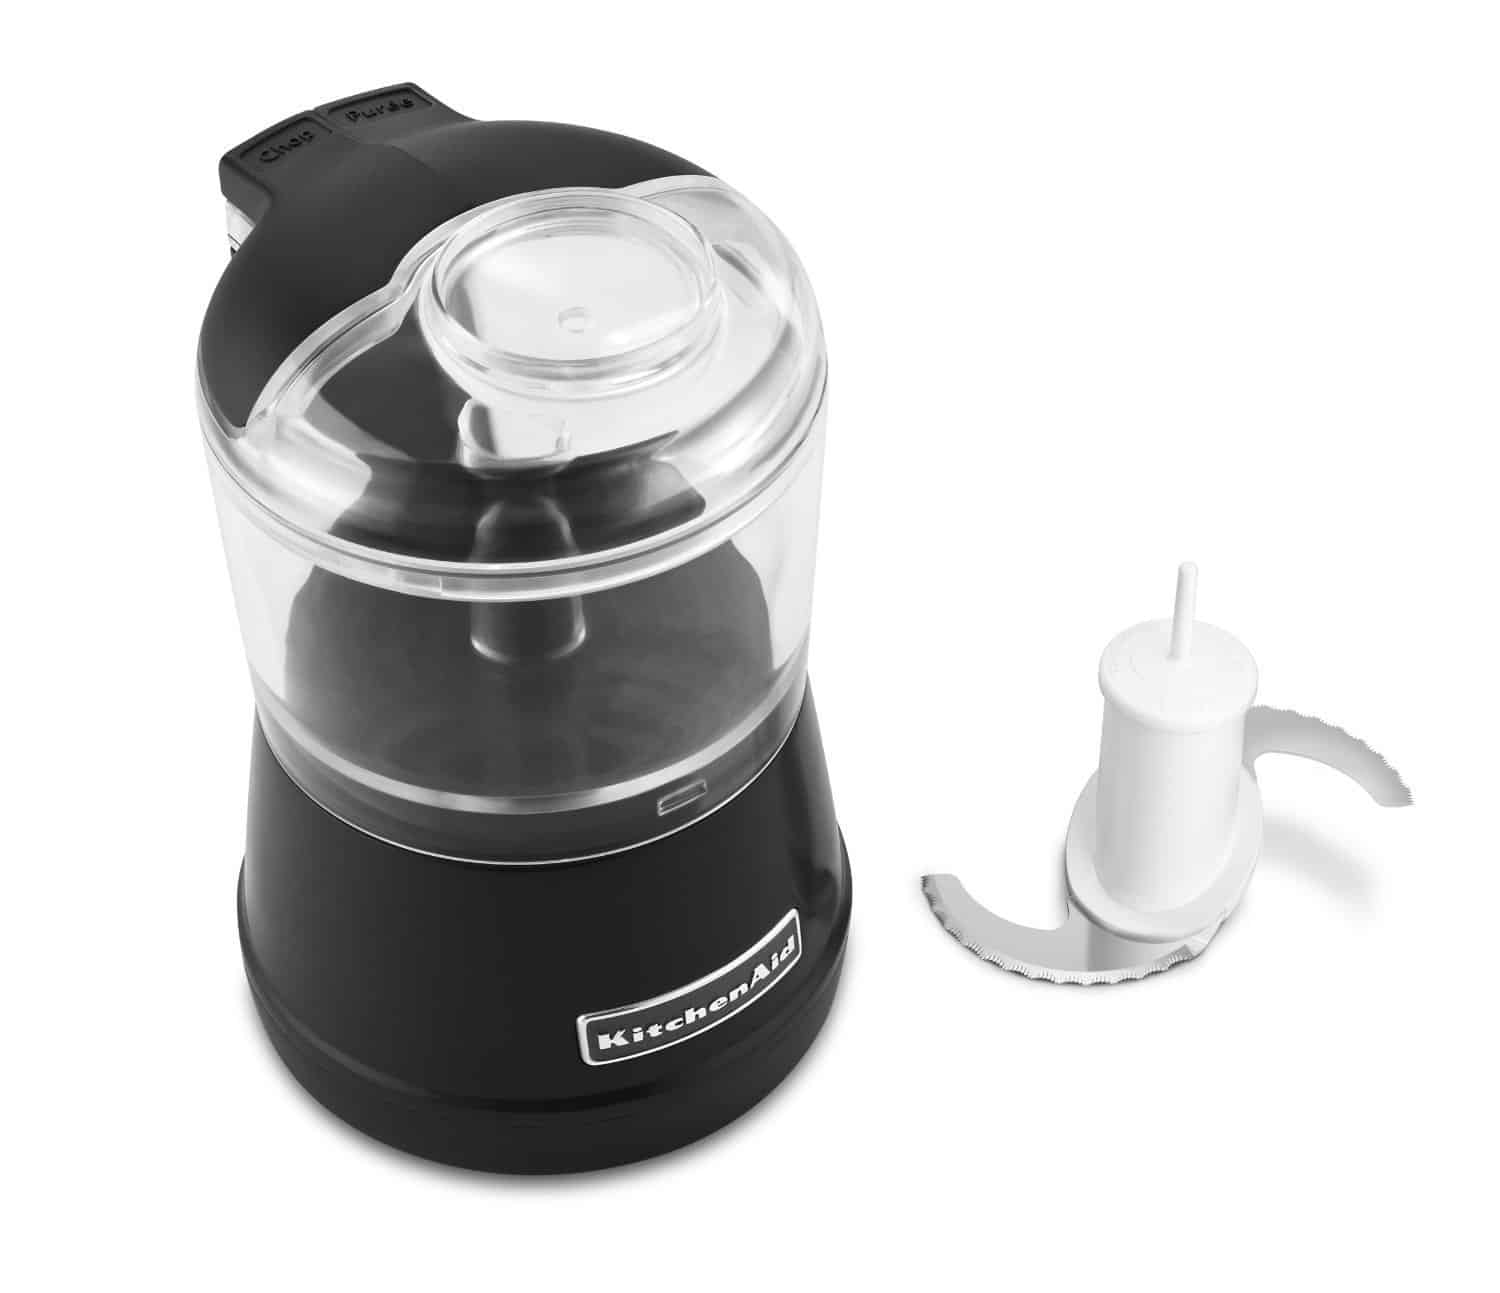 Food Processor review: Baby Bullet - Baby Bargains